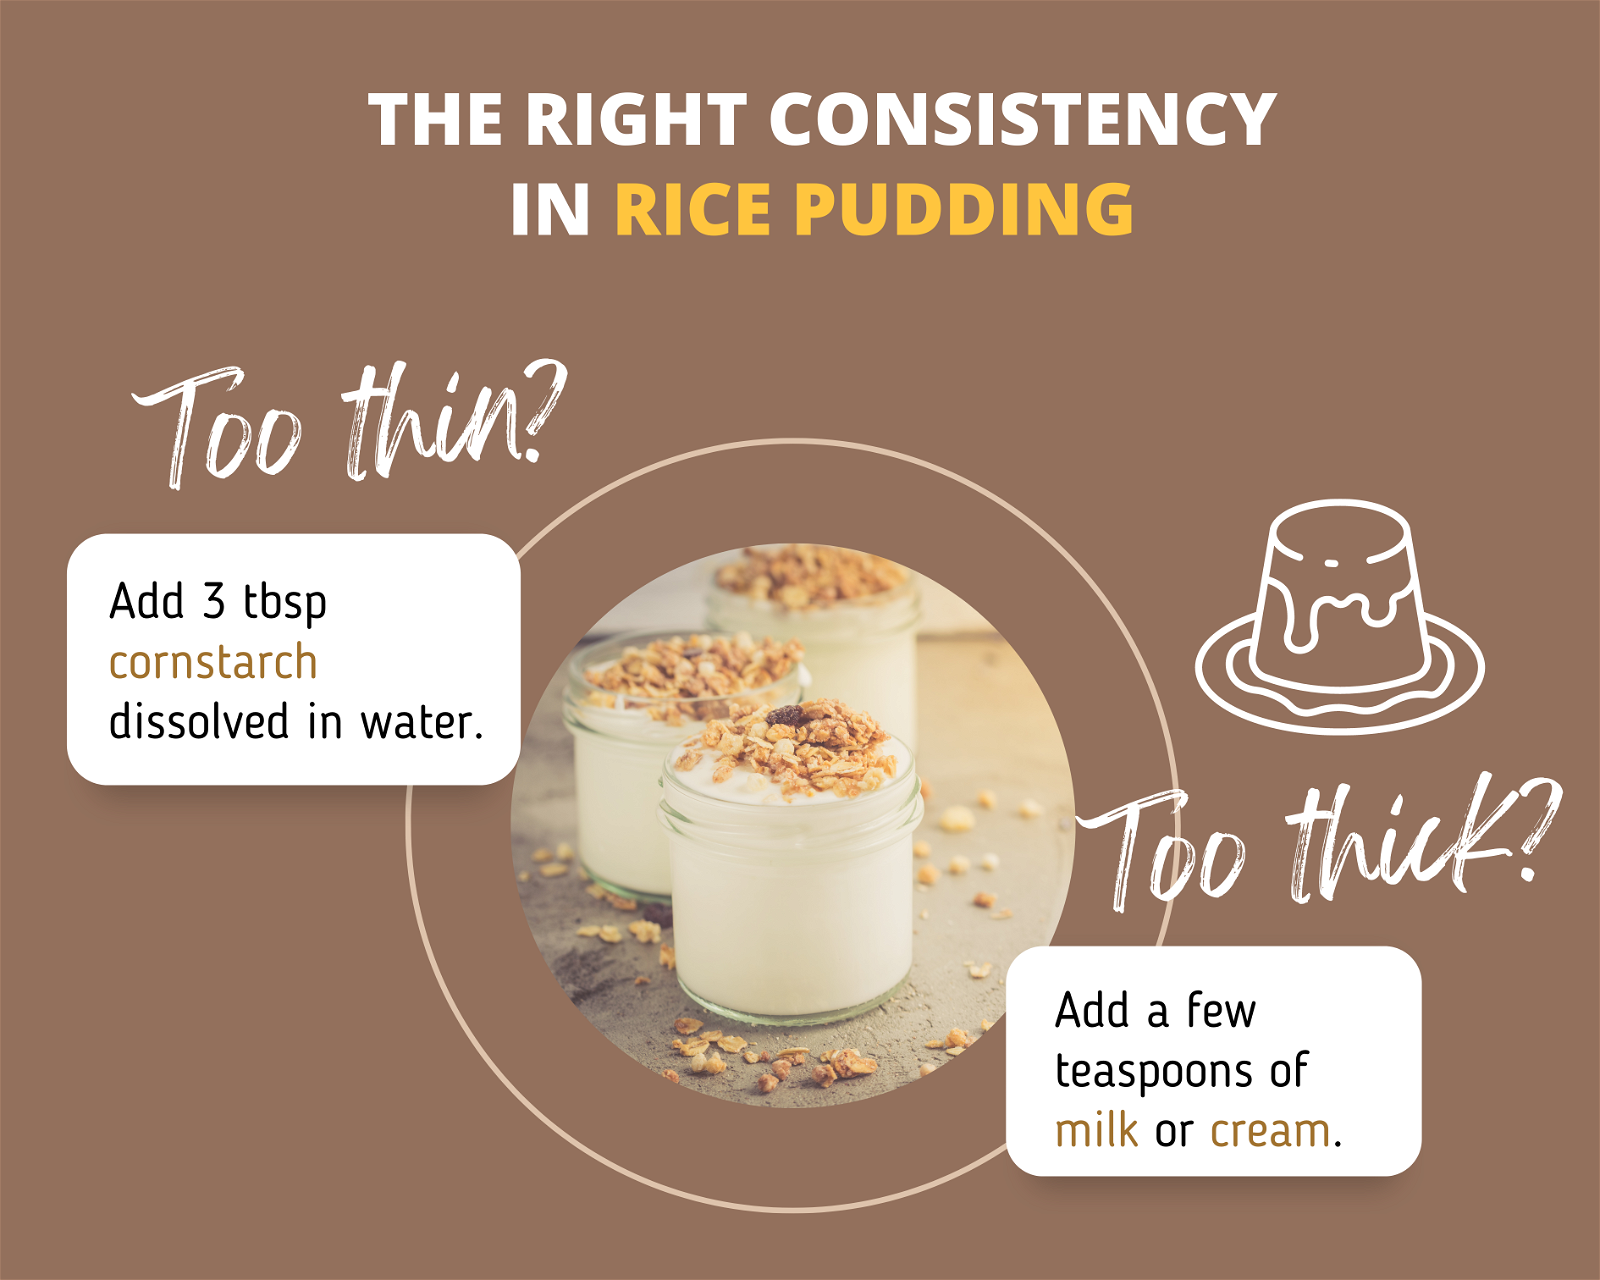 How To Get The Right Consistency in Rice Pudding
